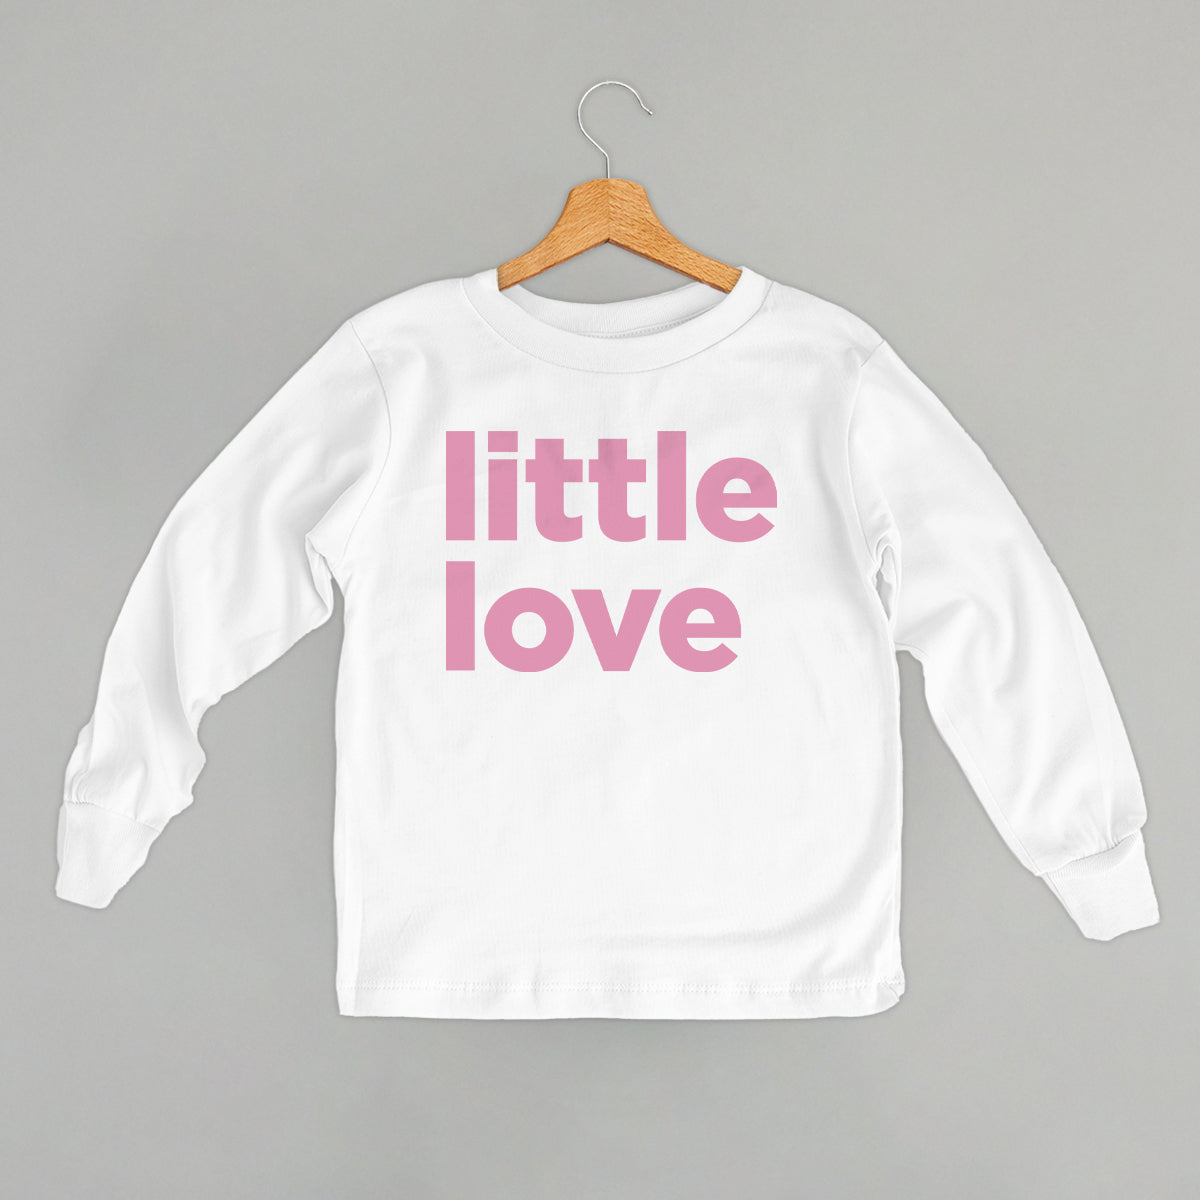 Love And Little Love (Pink)